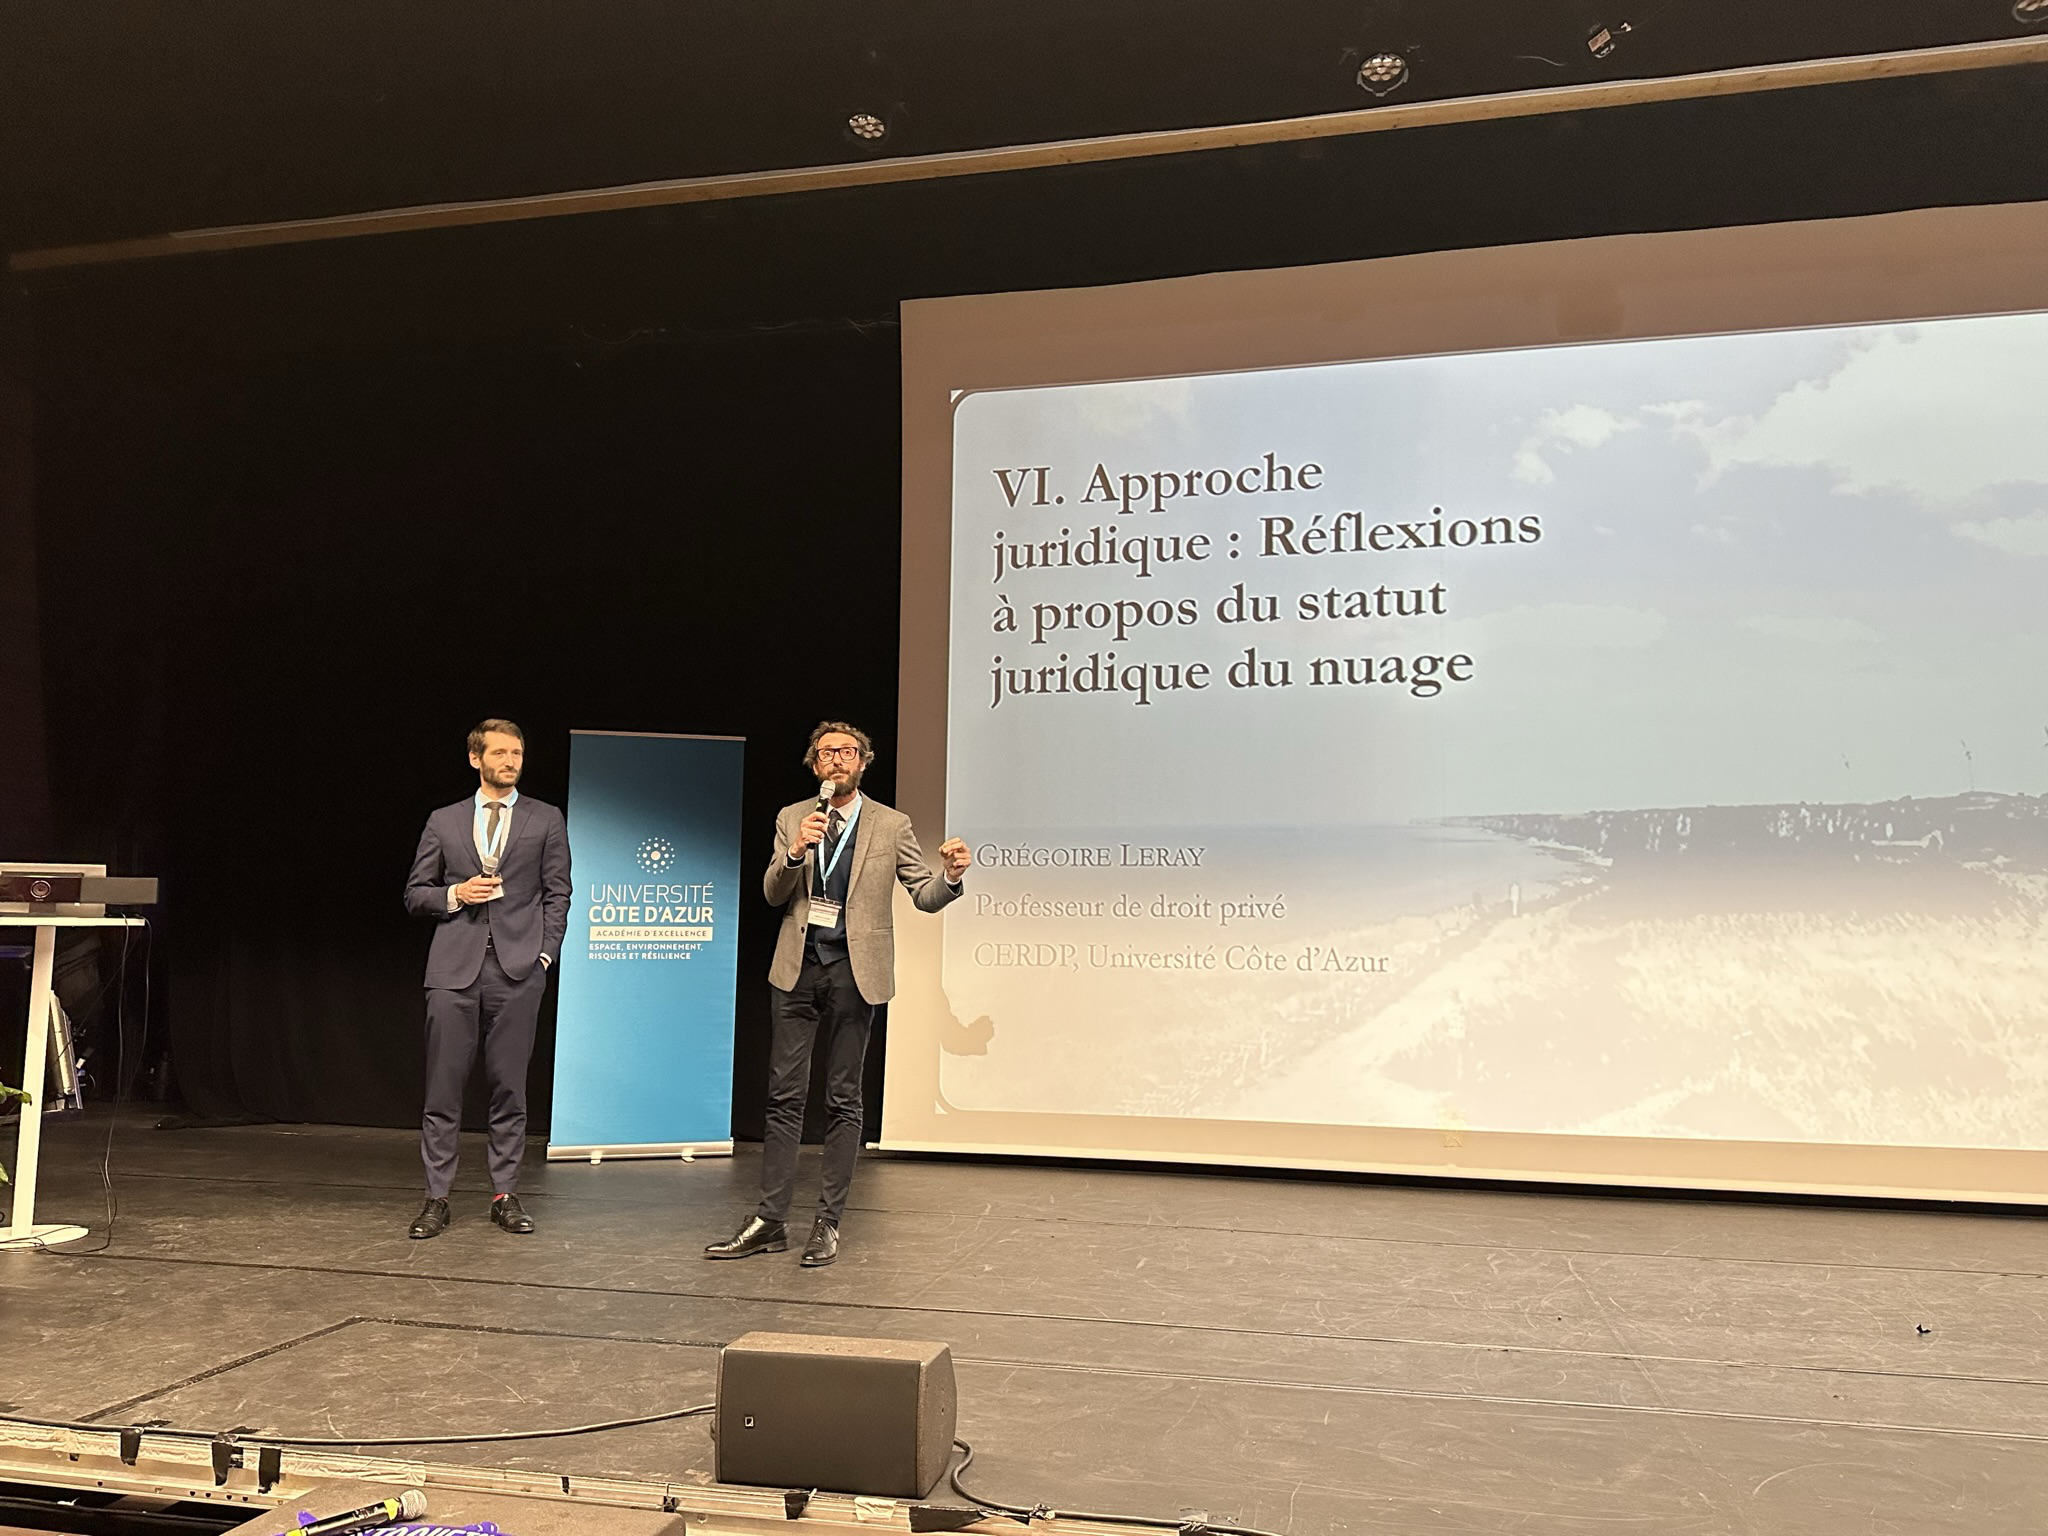 Grégoire Leray - 6th speaker of the day and Jean-Christophe Martin